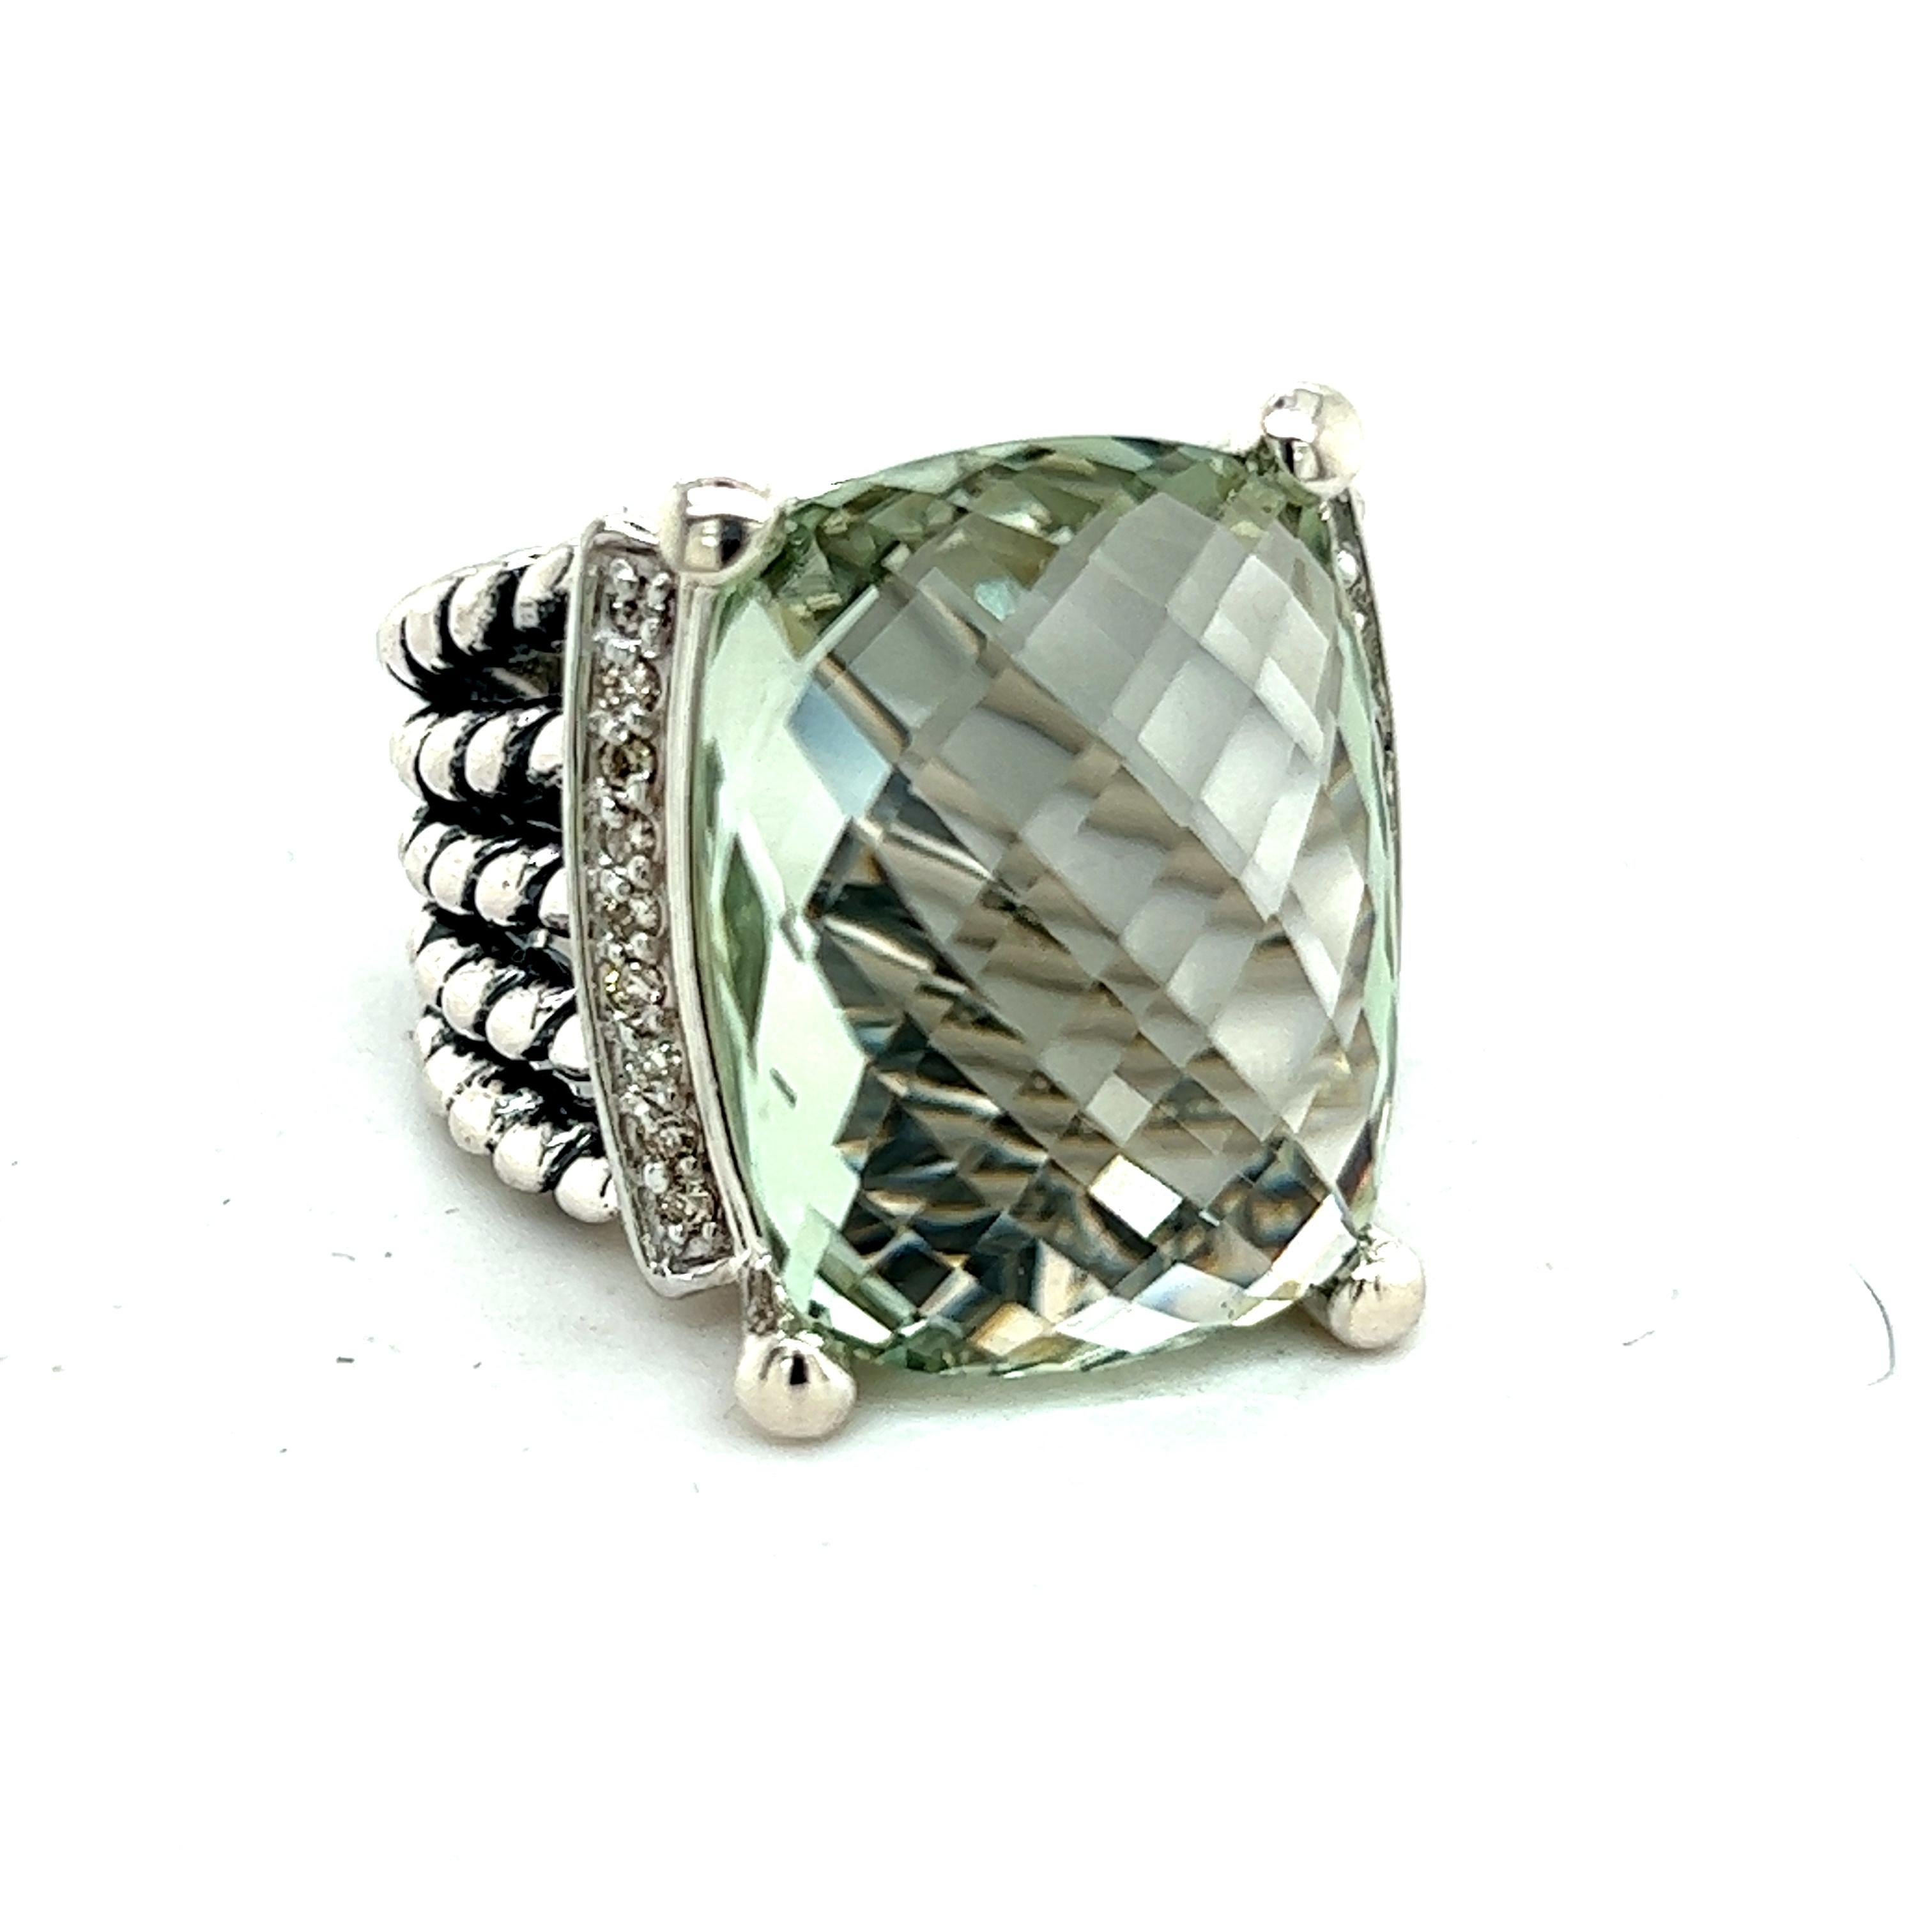 David Yurman Authentic Estate Wheaton Prasiolite Pave Diamond Ring 6 Silver 20 x 15 mm DY242

Retail: $1,599.00

This elegant Authentic David Yurman ring is made of sterling silver.

TRUSTED SELLER SINCE 2002

PLEASE SEE OUR HUNDREDS OF POSITIVE